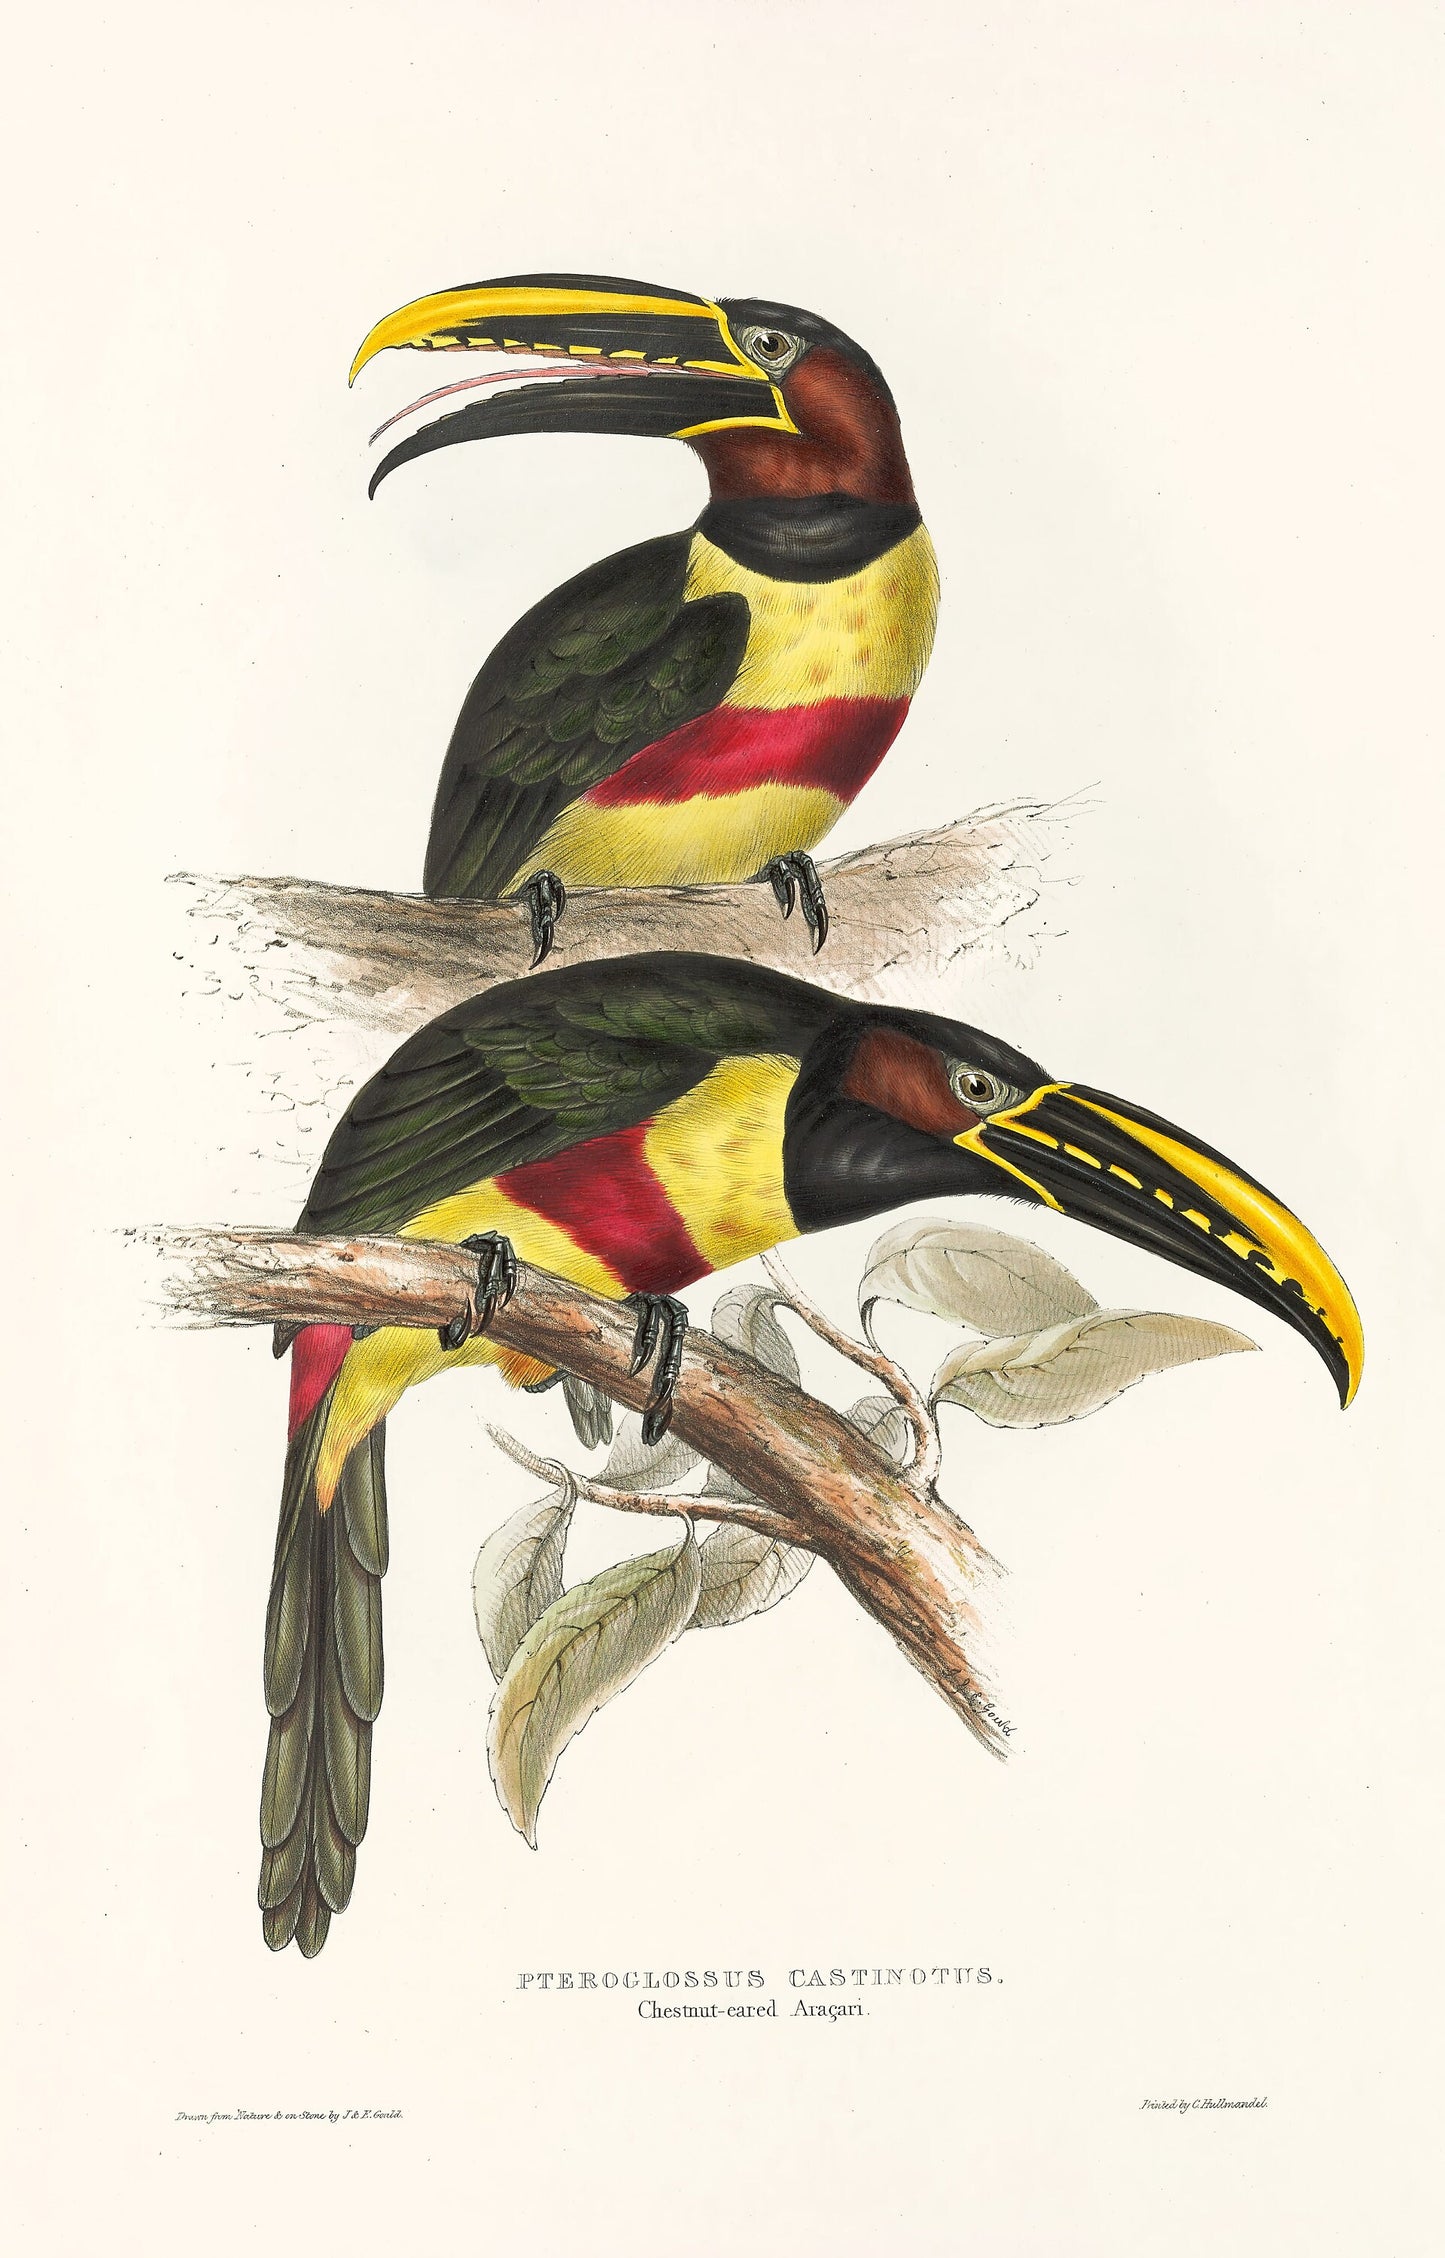 John Gould A Monograph of the Ramphastidae Toucans [33 Images]